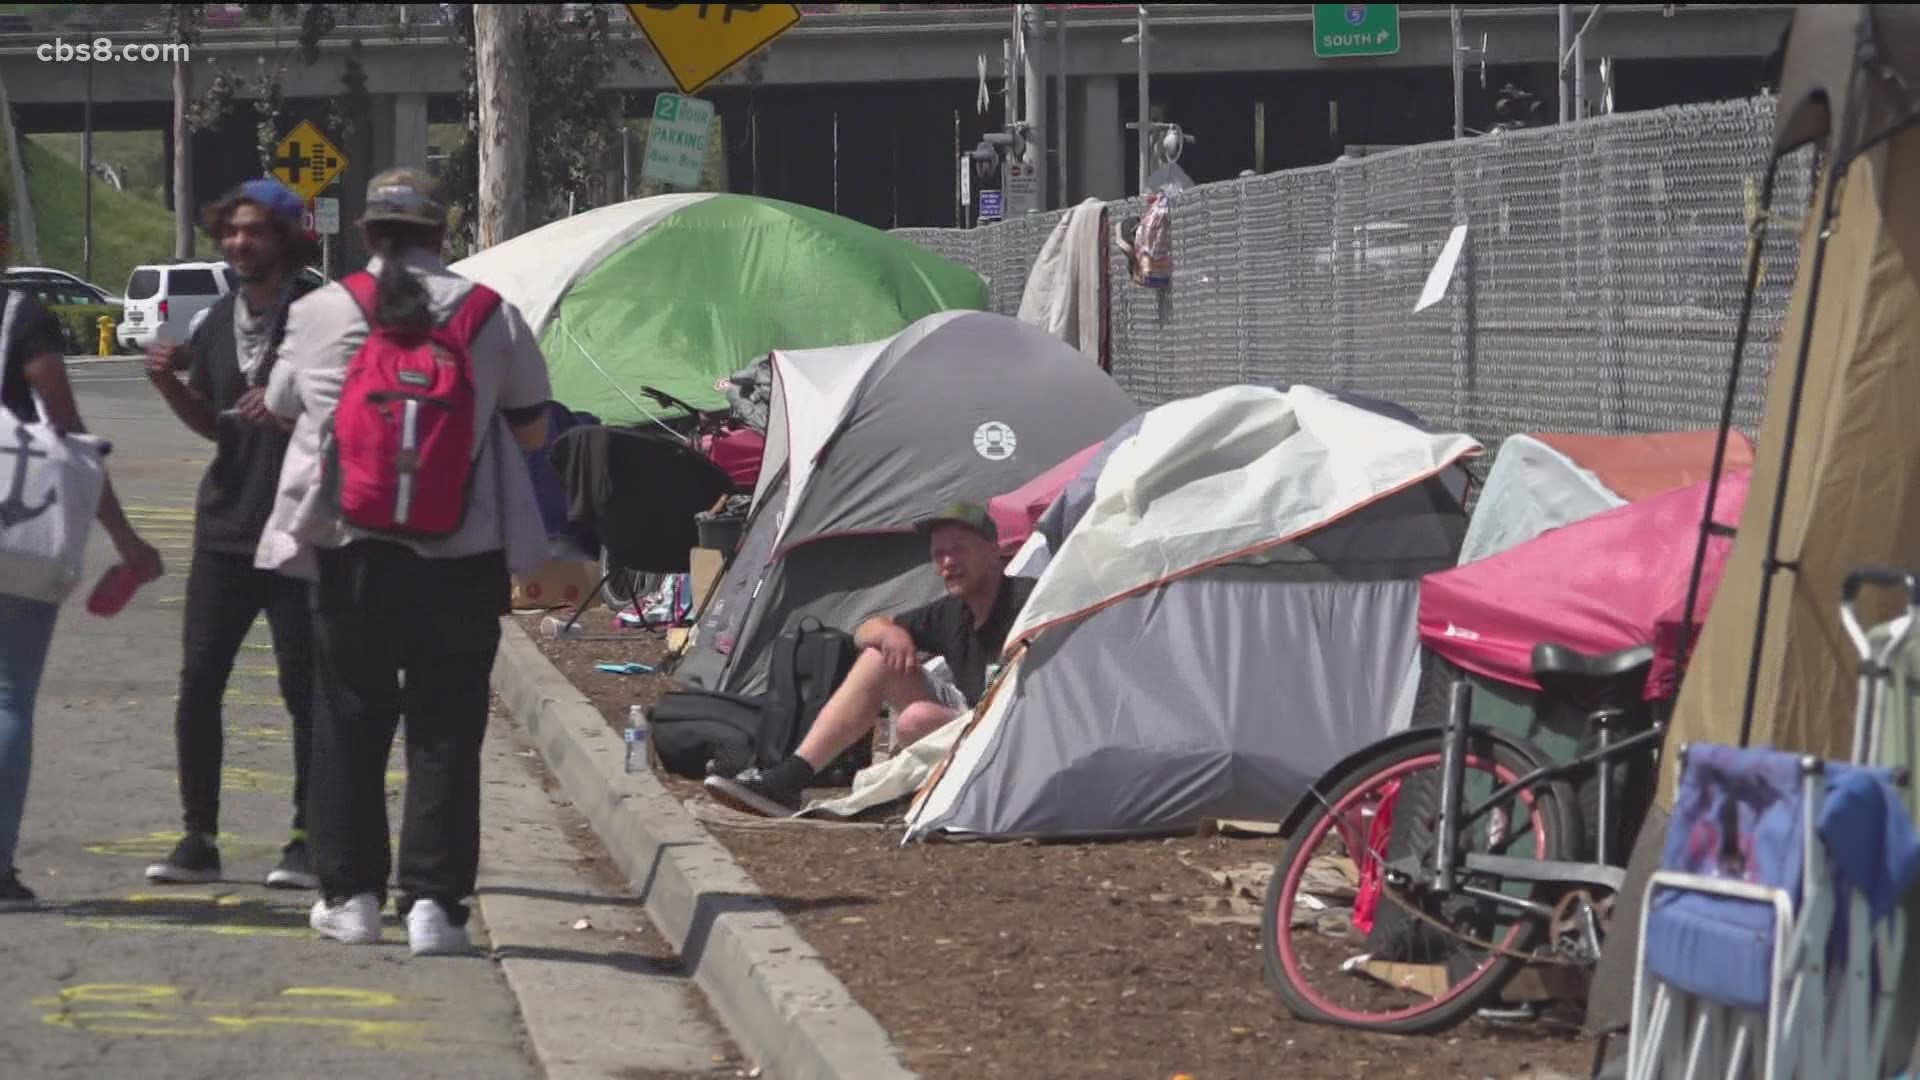 Those displaced will get a free motel room temporarily. Meanwhile, the city says it is in the process of opening its first year-round homeless shelter.